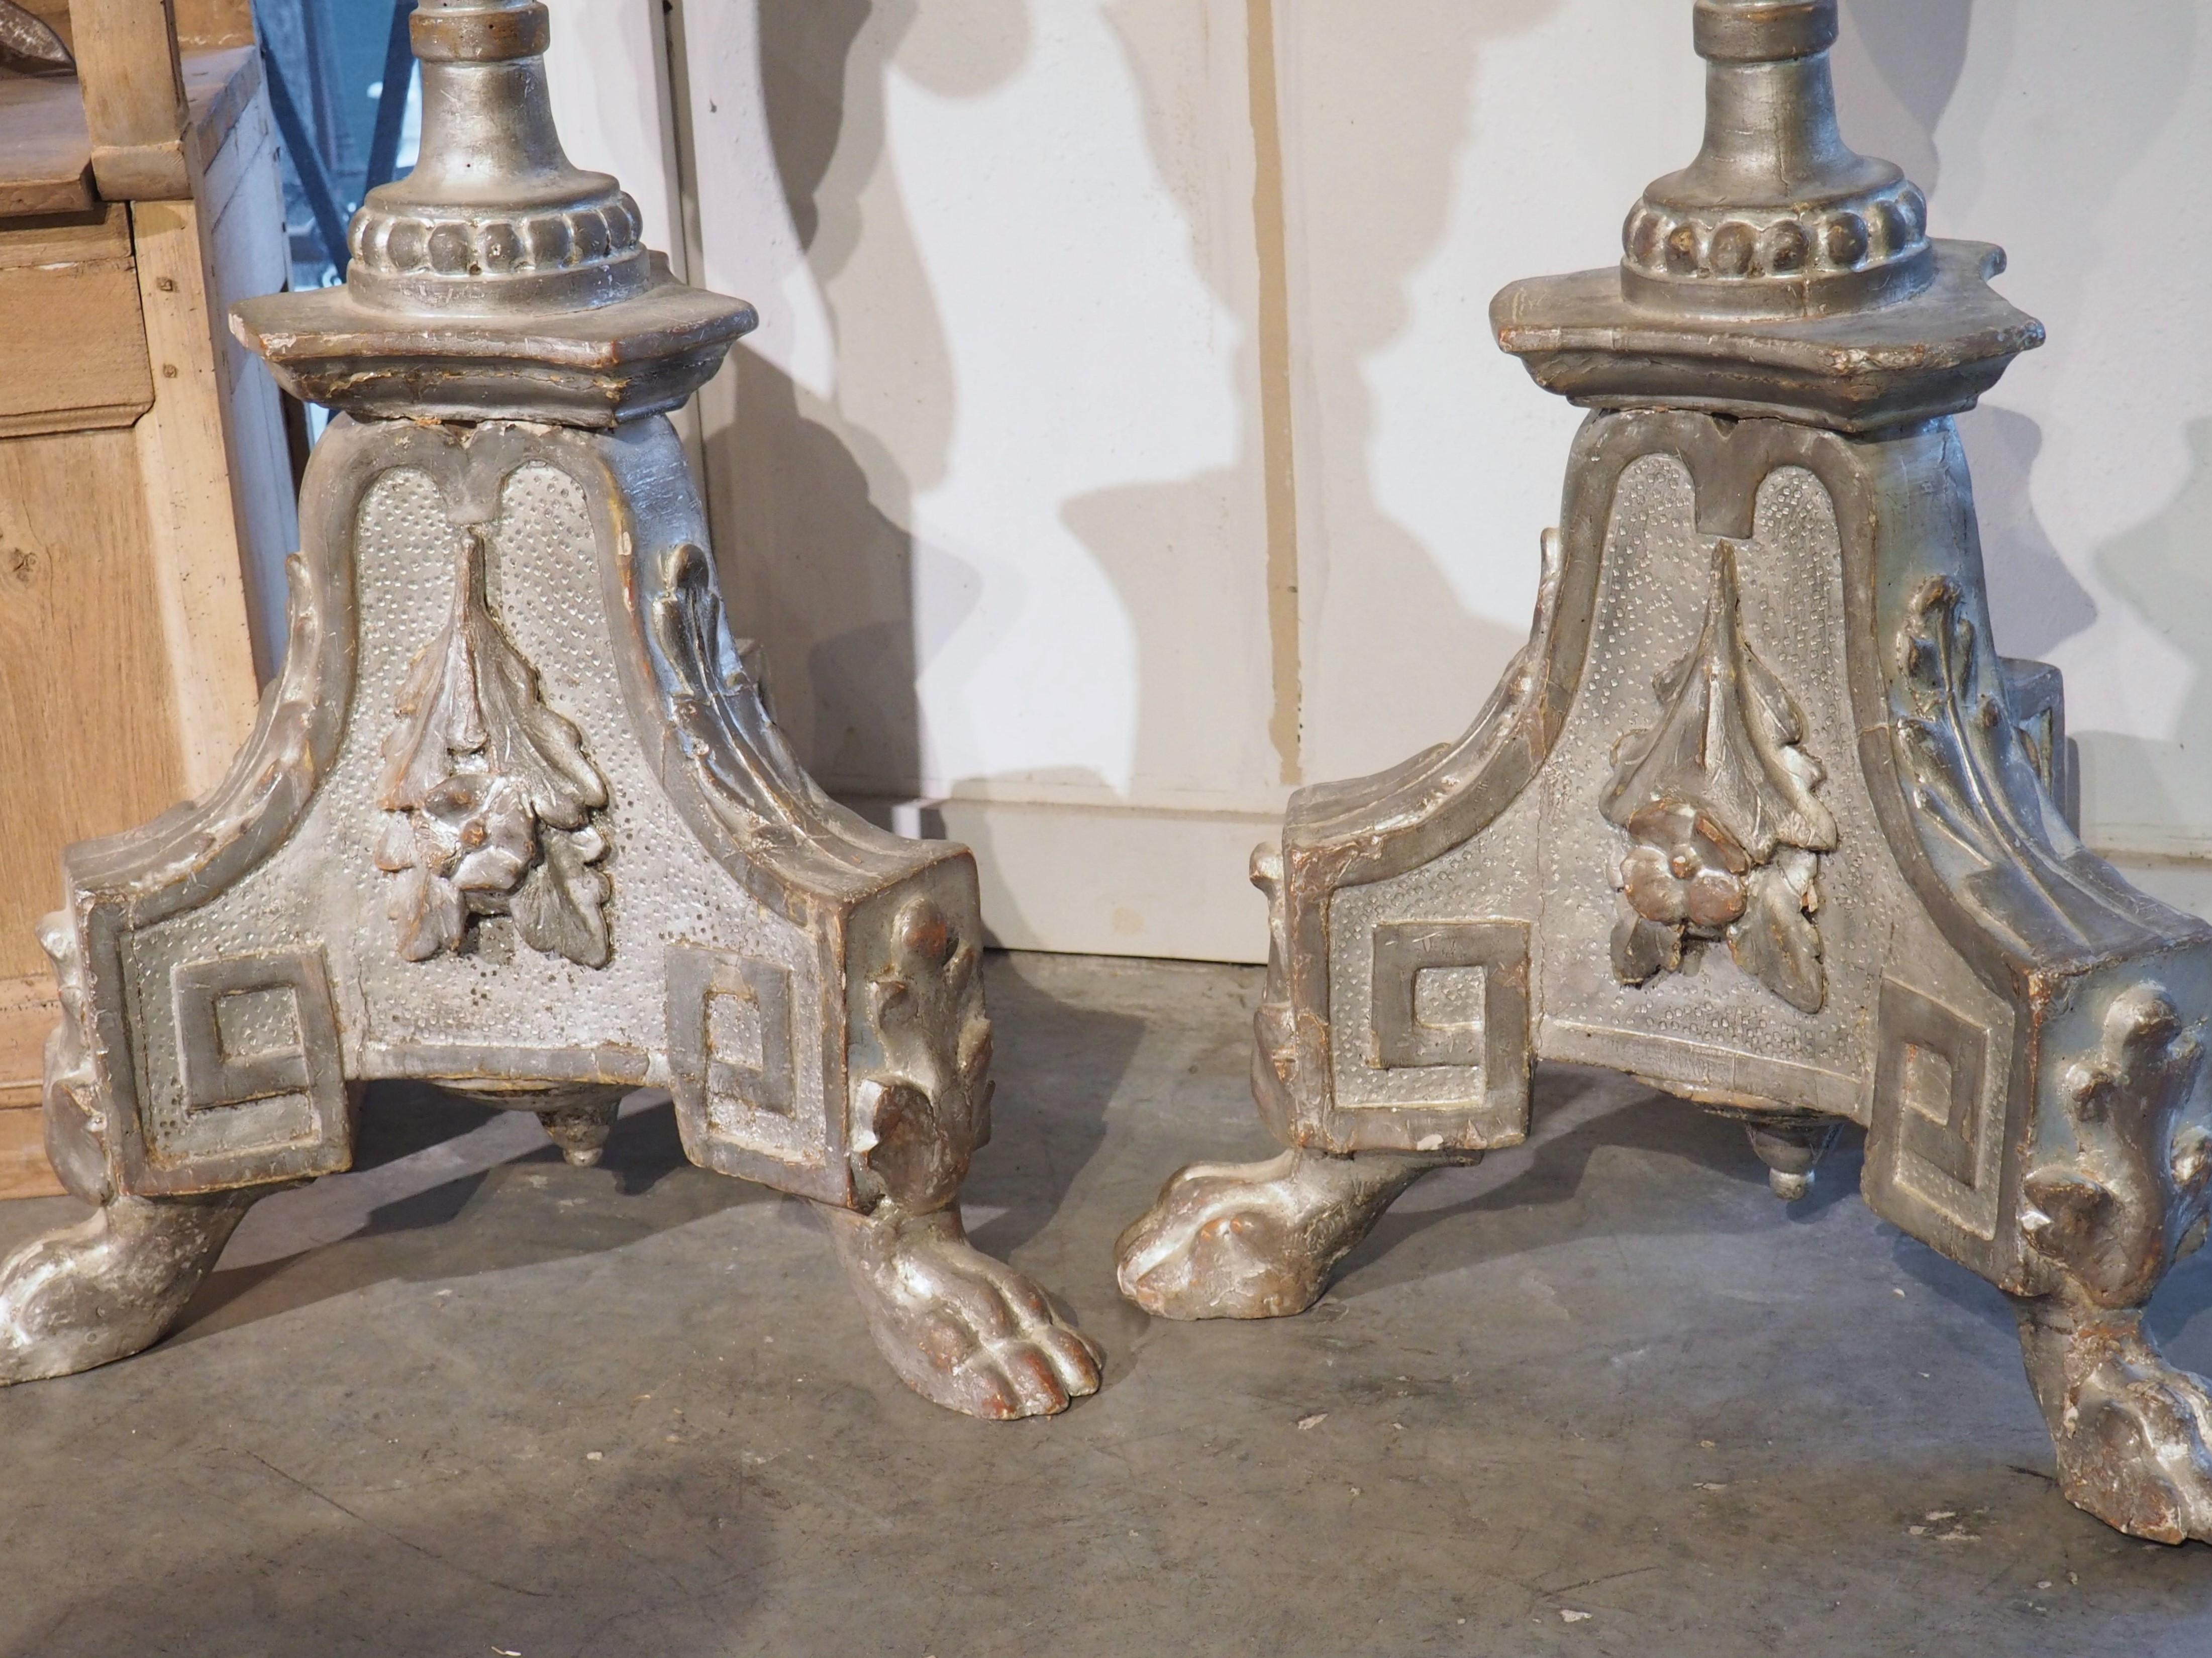 Pair of 76 Inch H Antique Italian Silver Gilt Torchère Candlesticks, circa 1800 For Sale 8